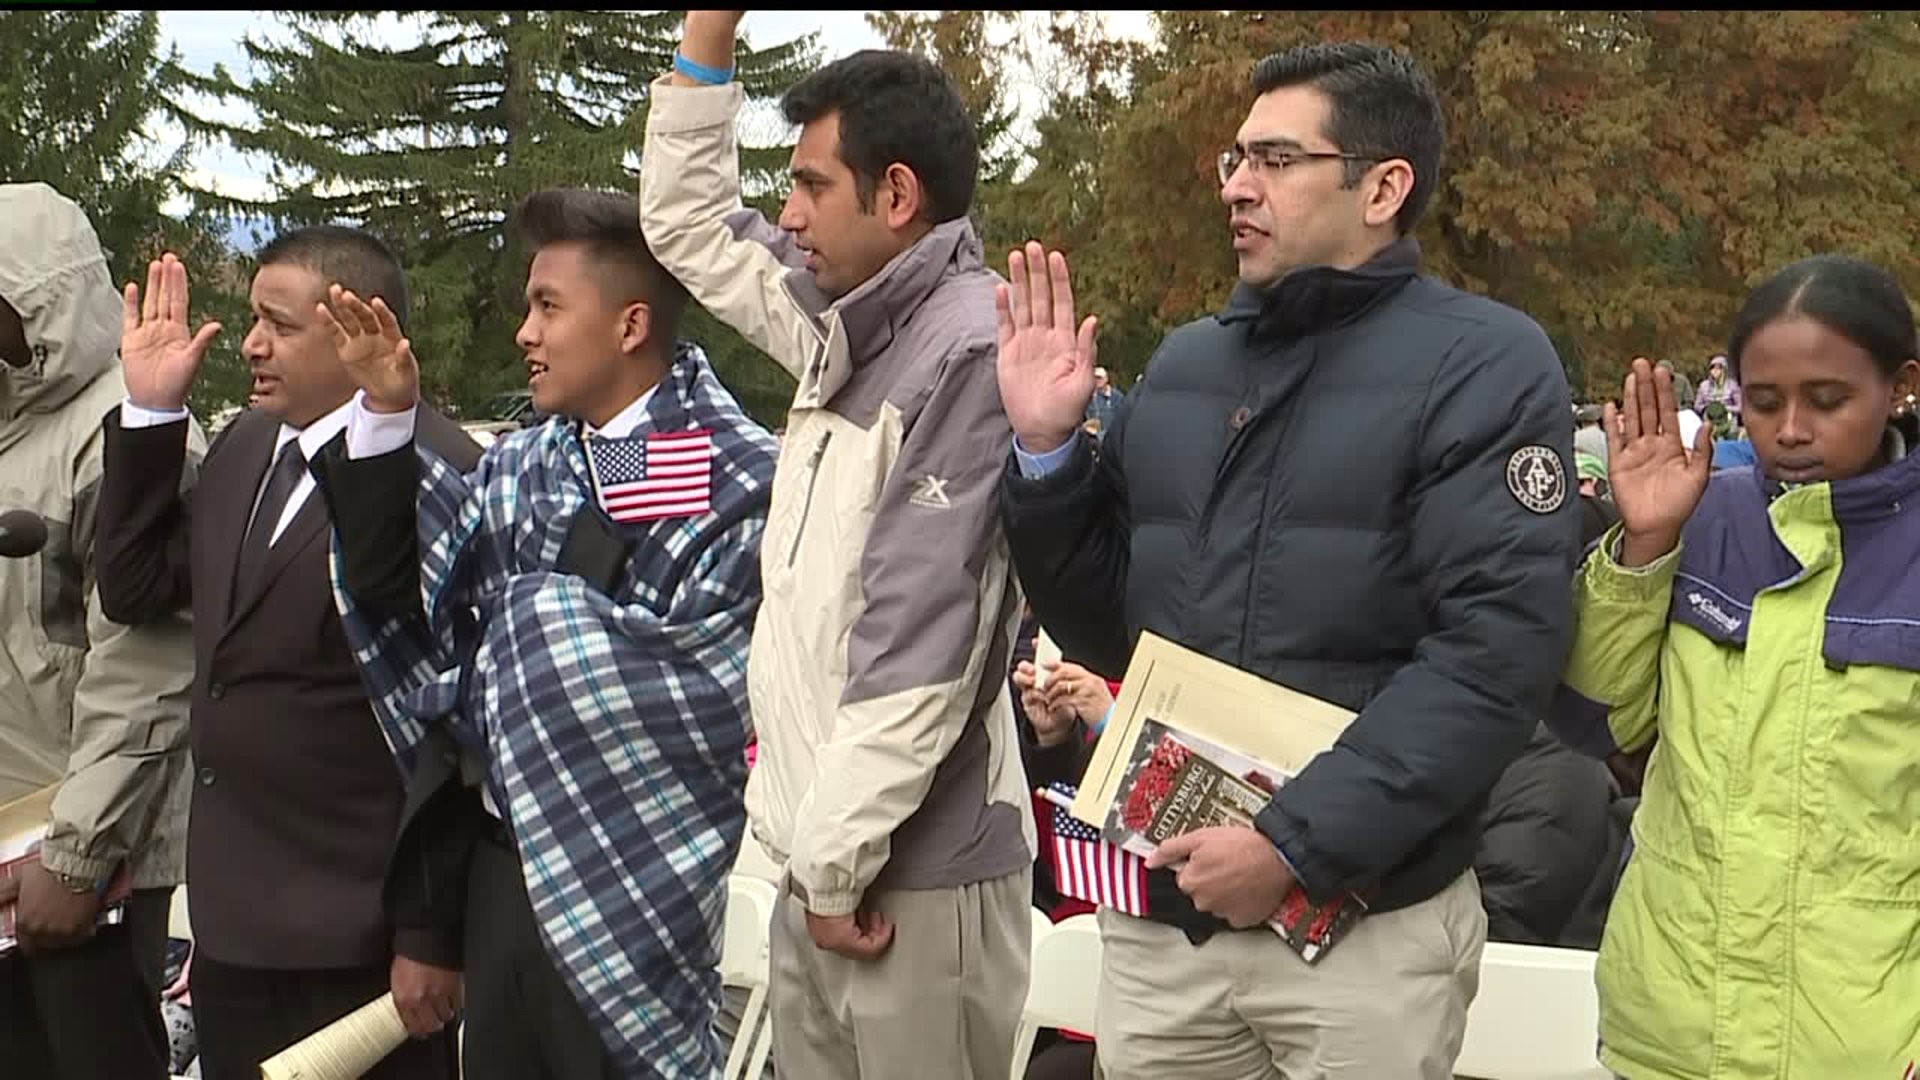 15 candidates naturalized in Gettysburg